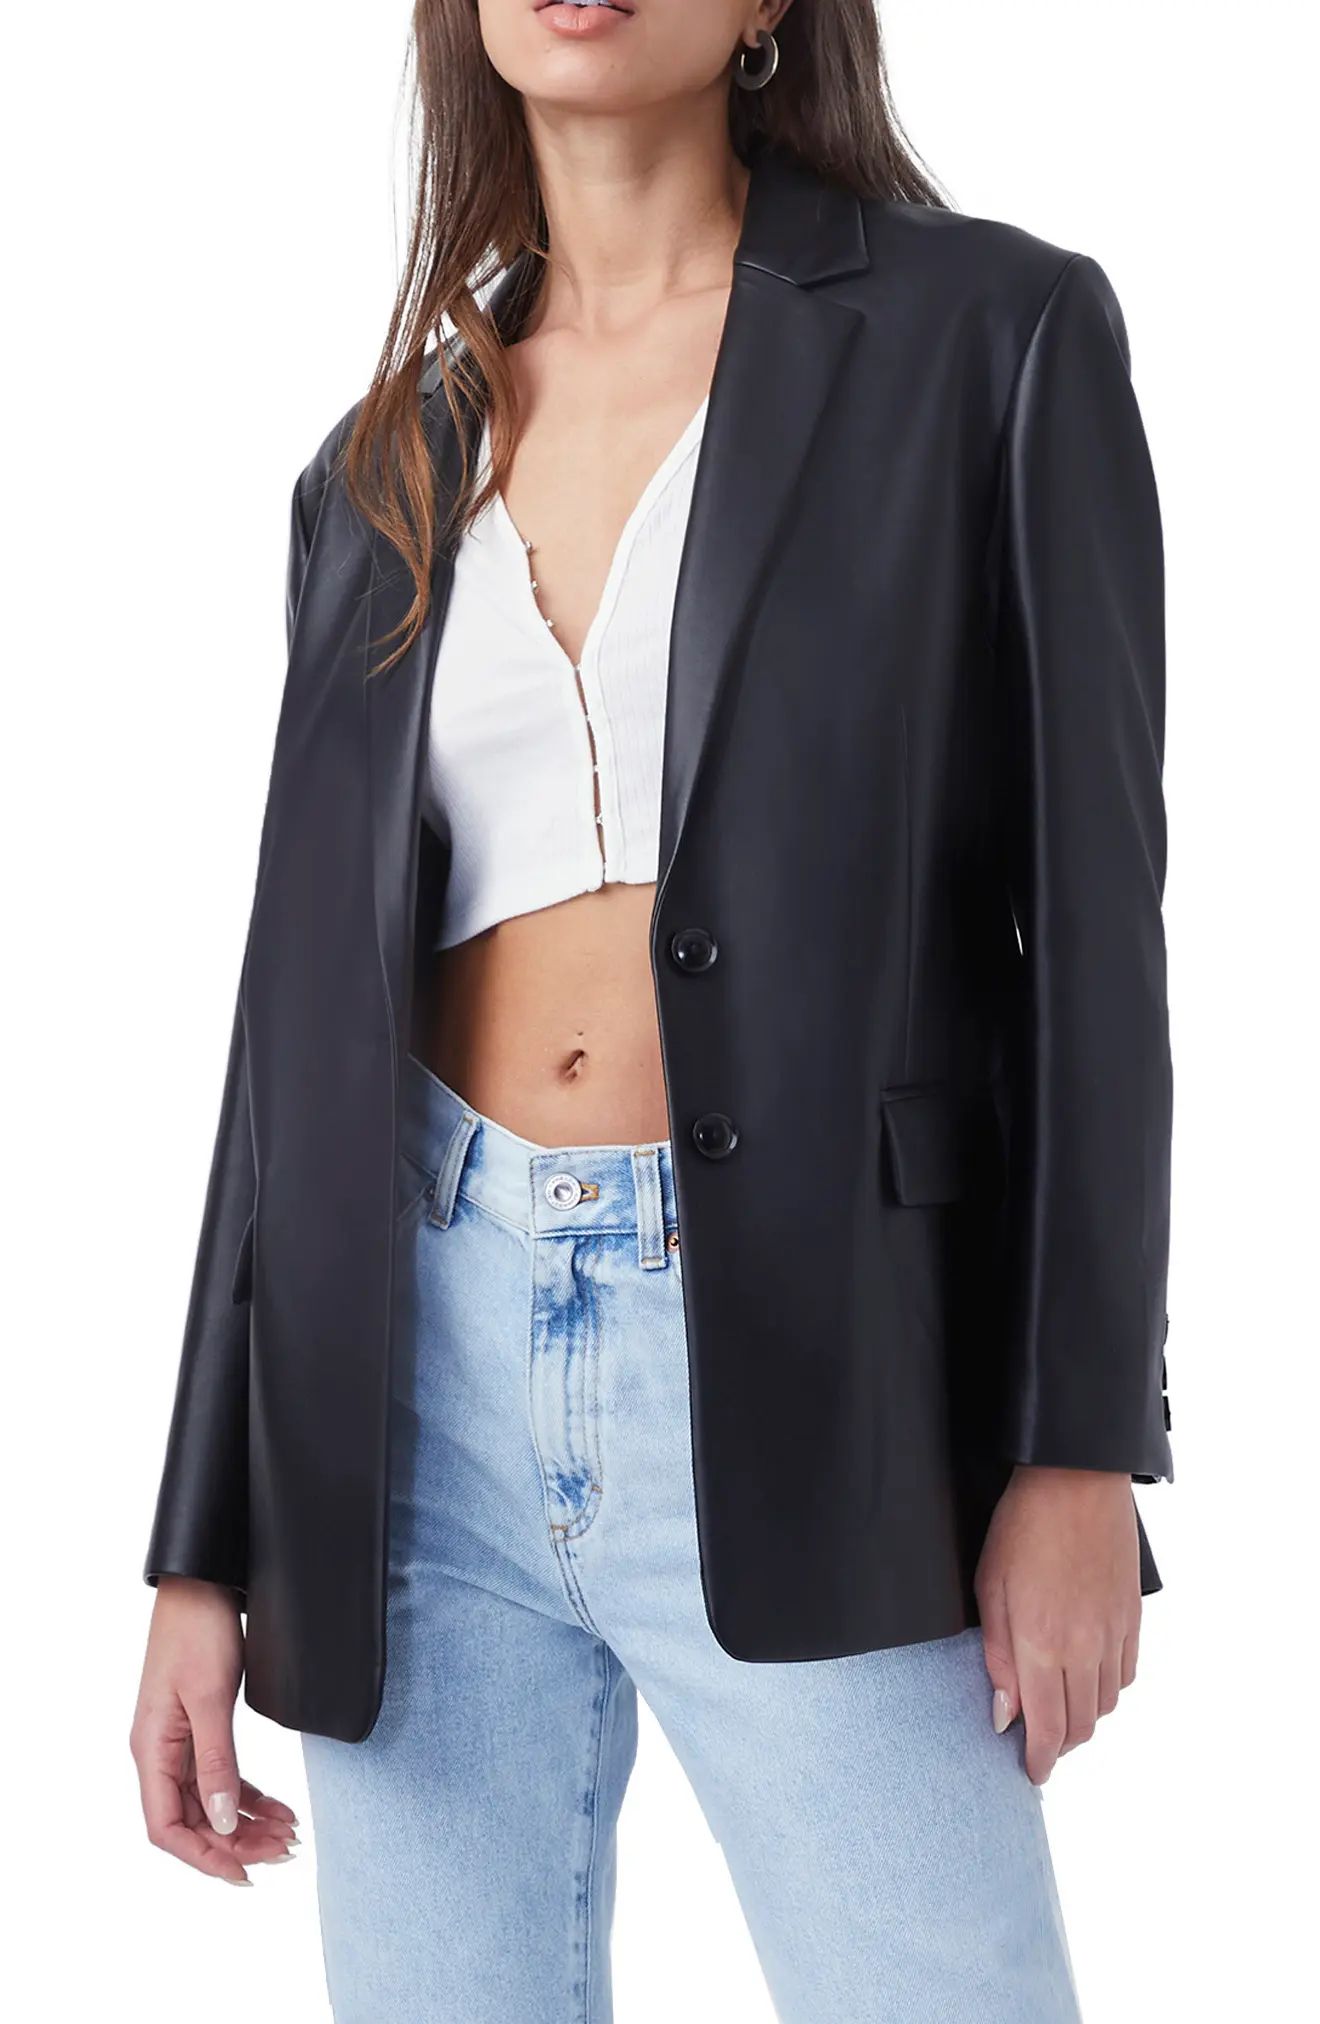 French Connection Crolenda Faux Leather Blazer, Size 10 in Black at Nordstrom | Nordstrom